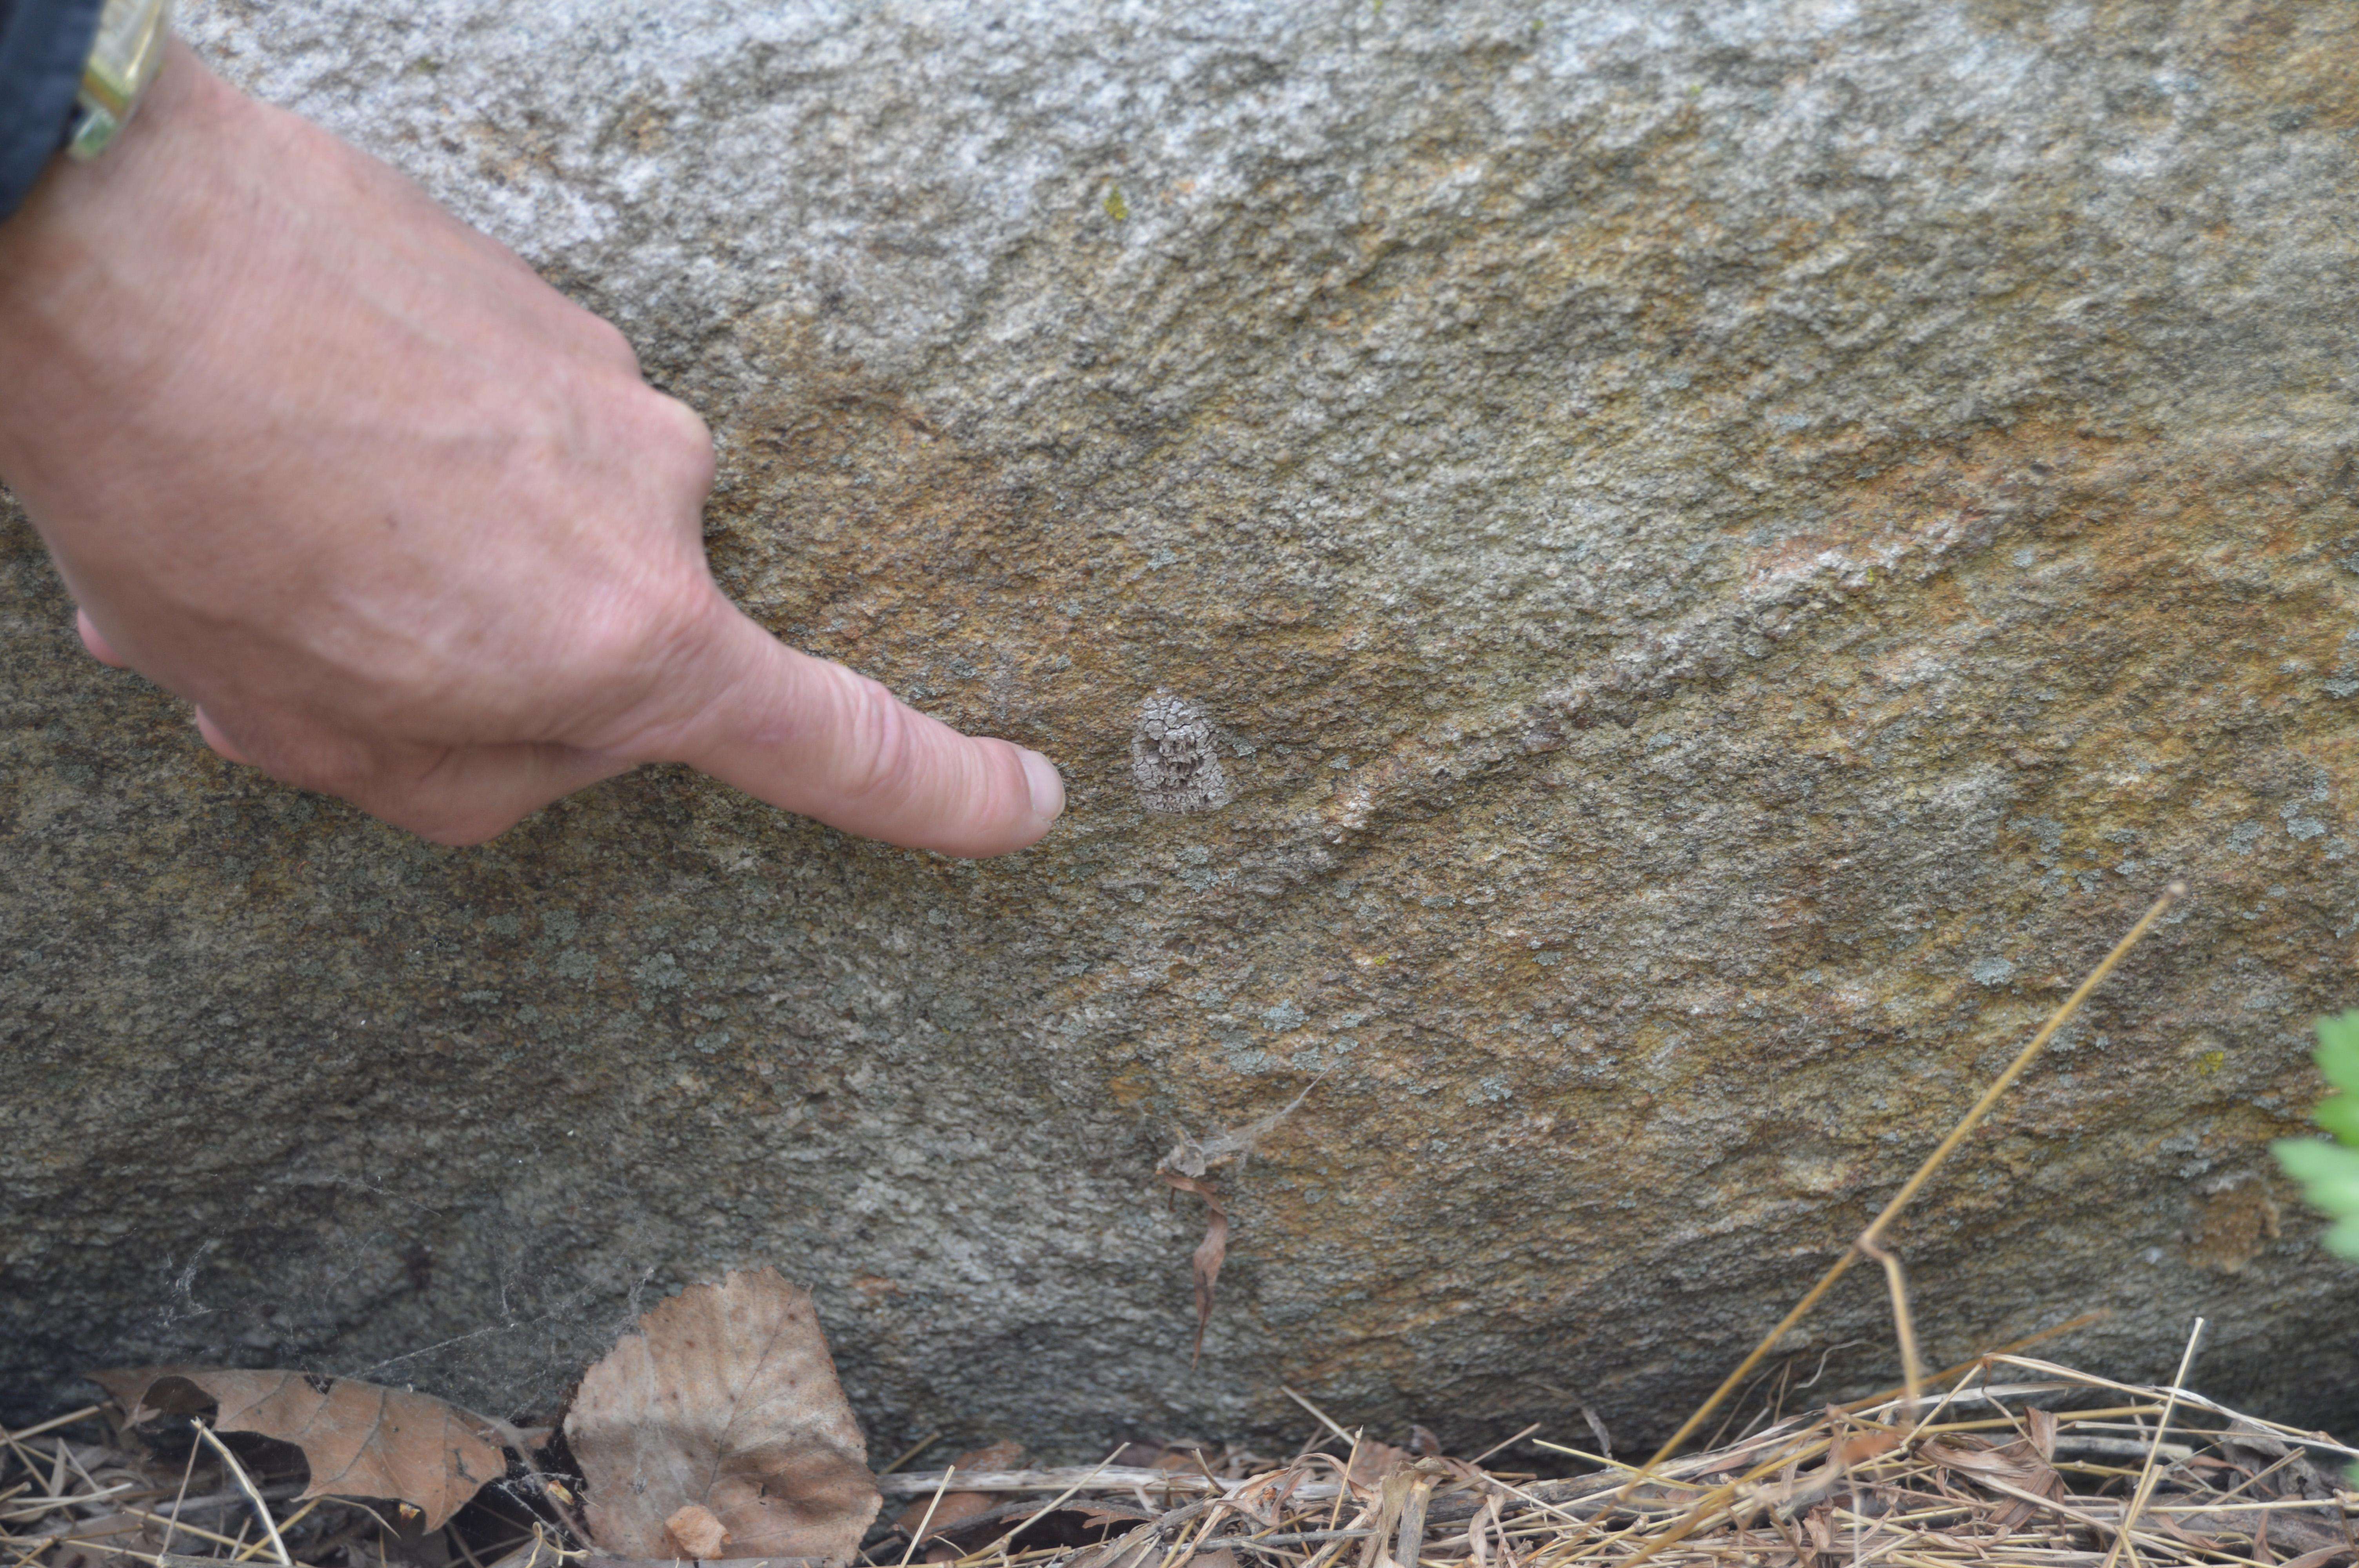 FInger pointing to Spotted lanternfly egg mass on log.  